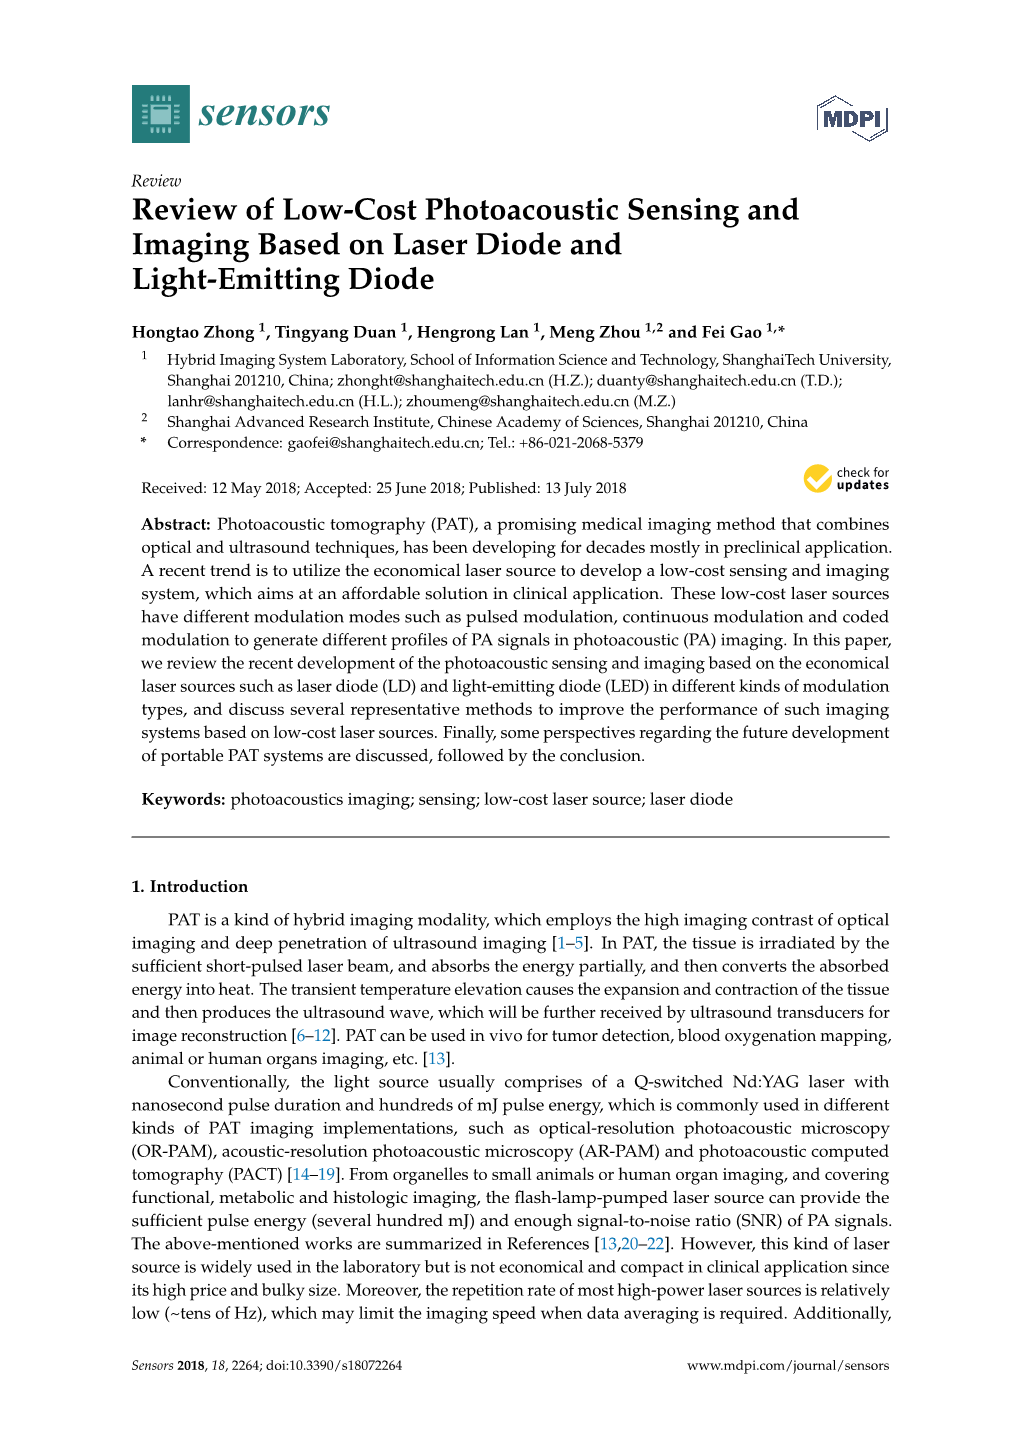 Review of Low-Cost Photoacoustic Sensing and Imaging Based on Laser Diode and Light-Emitting Diode